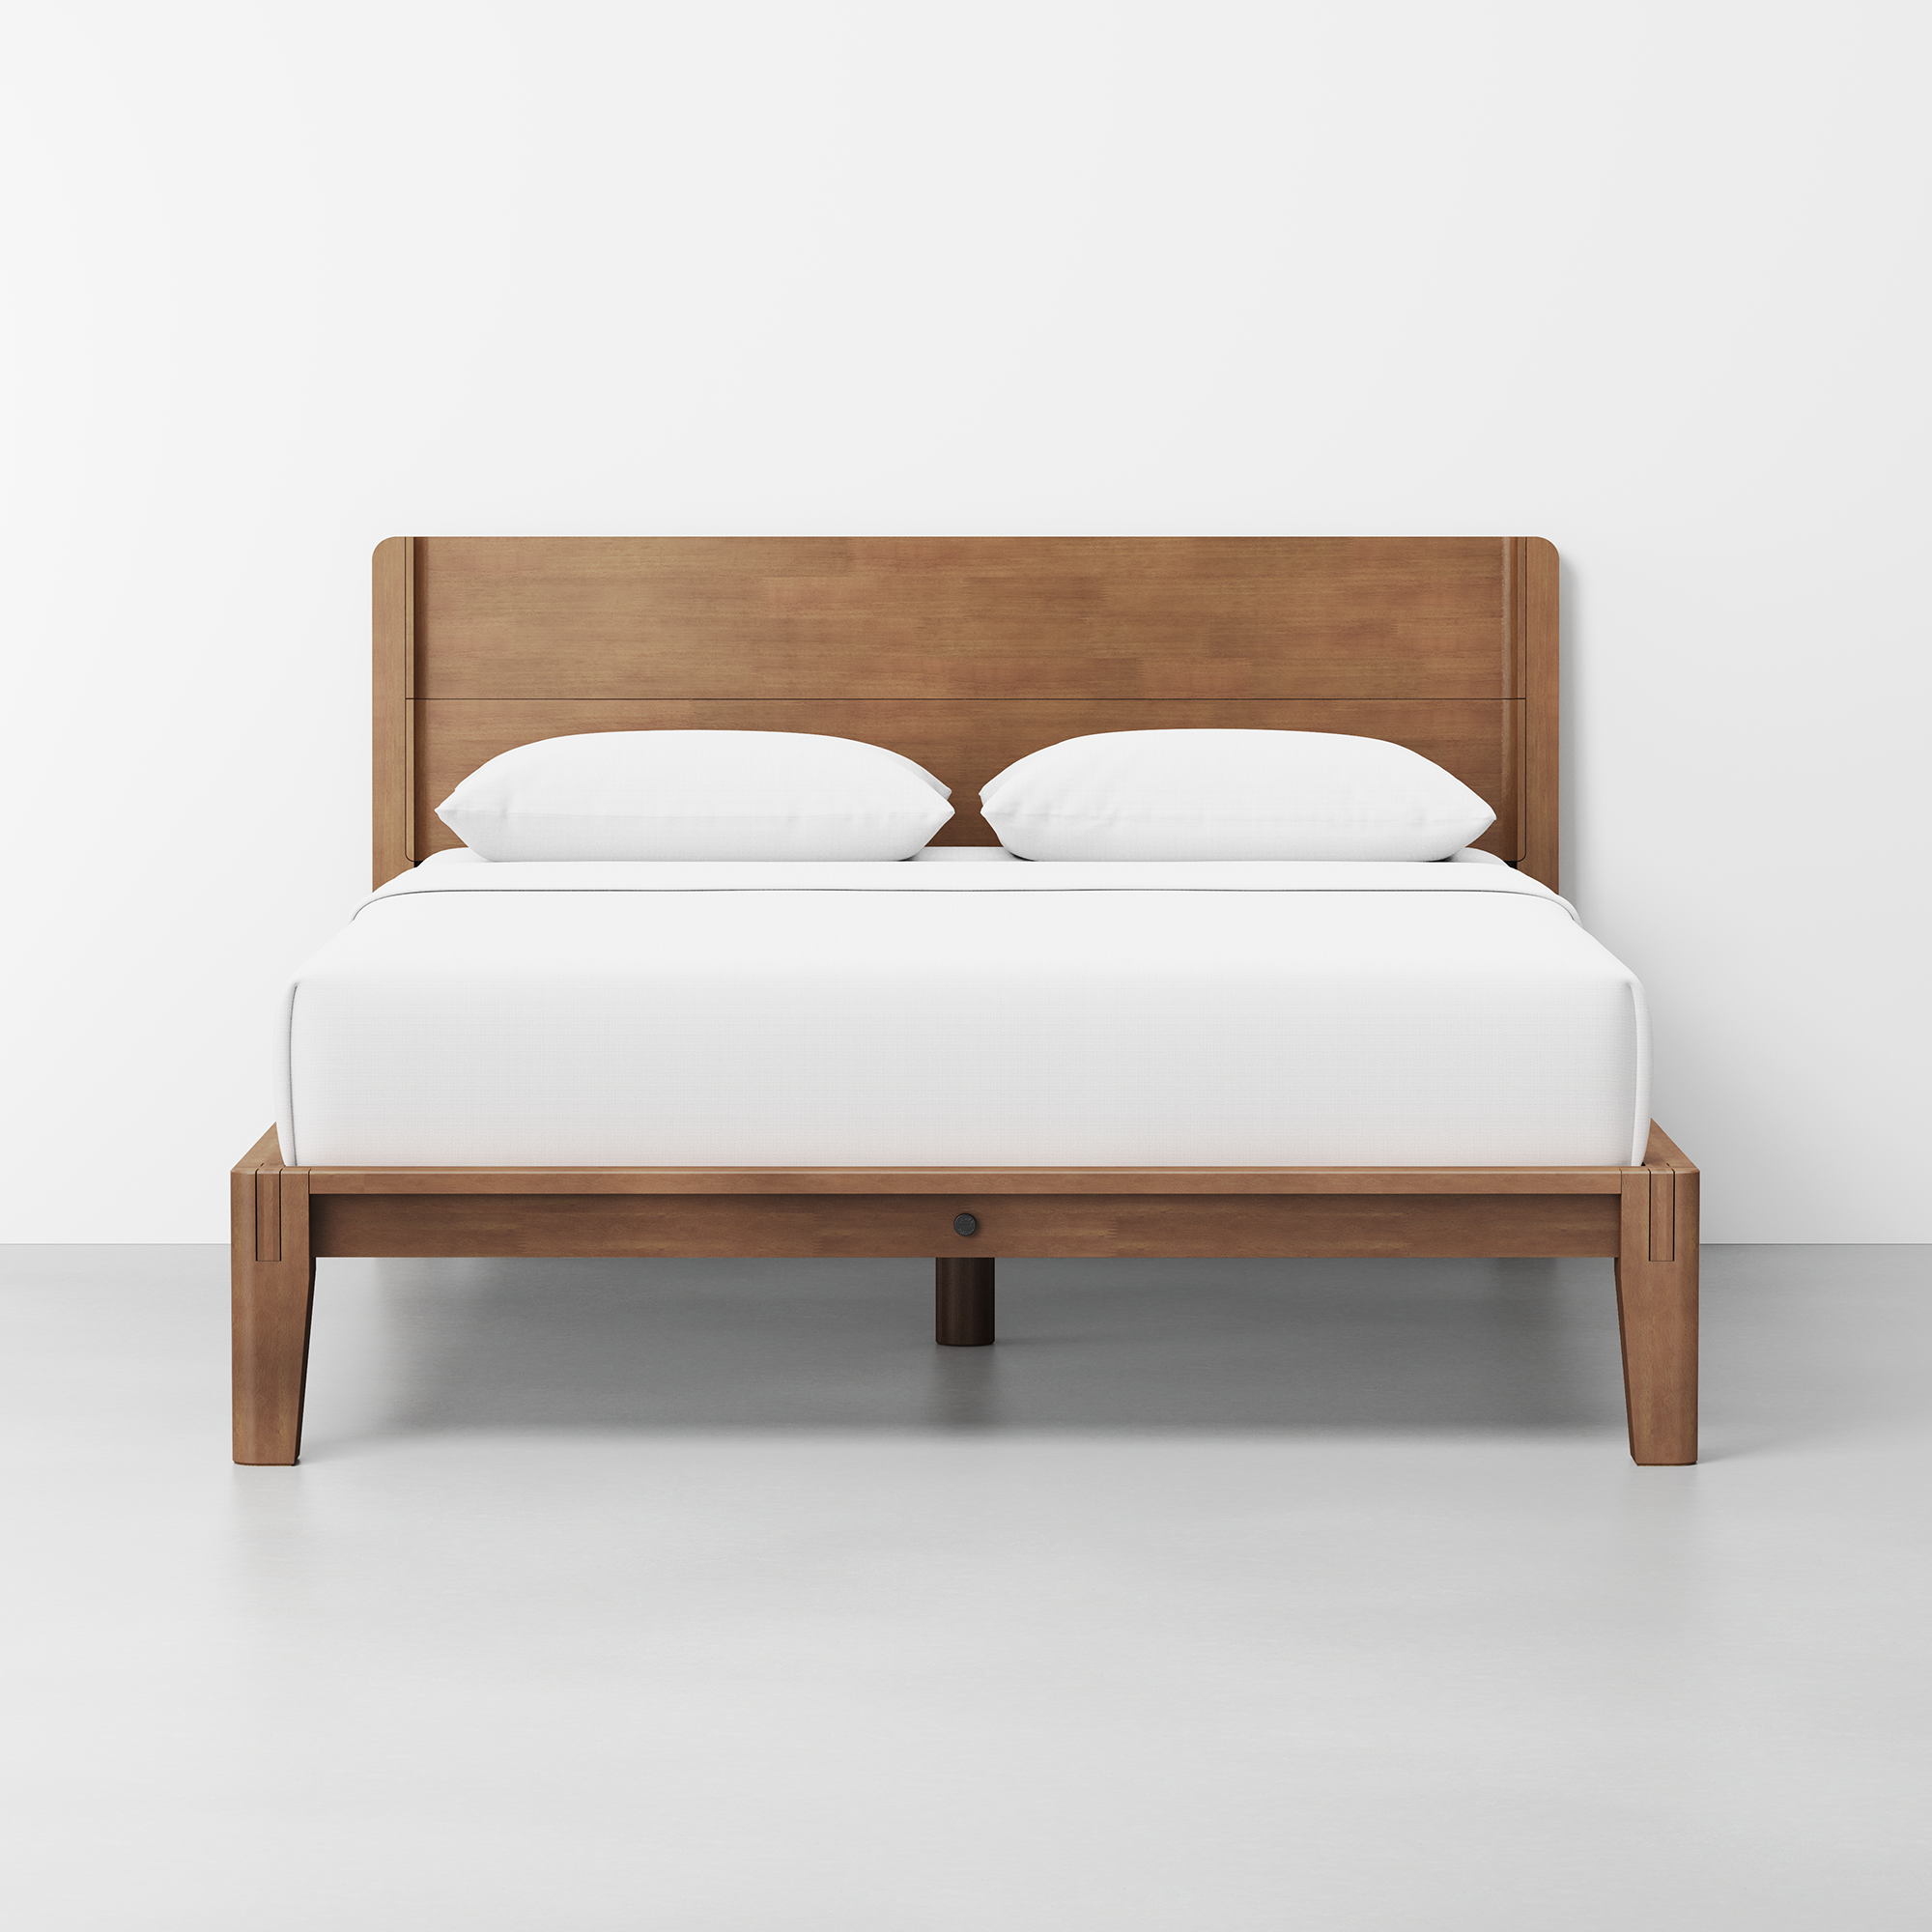 The Bed (Walnut / HB) - Render - Front